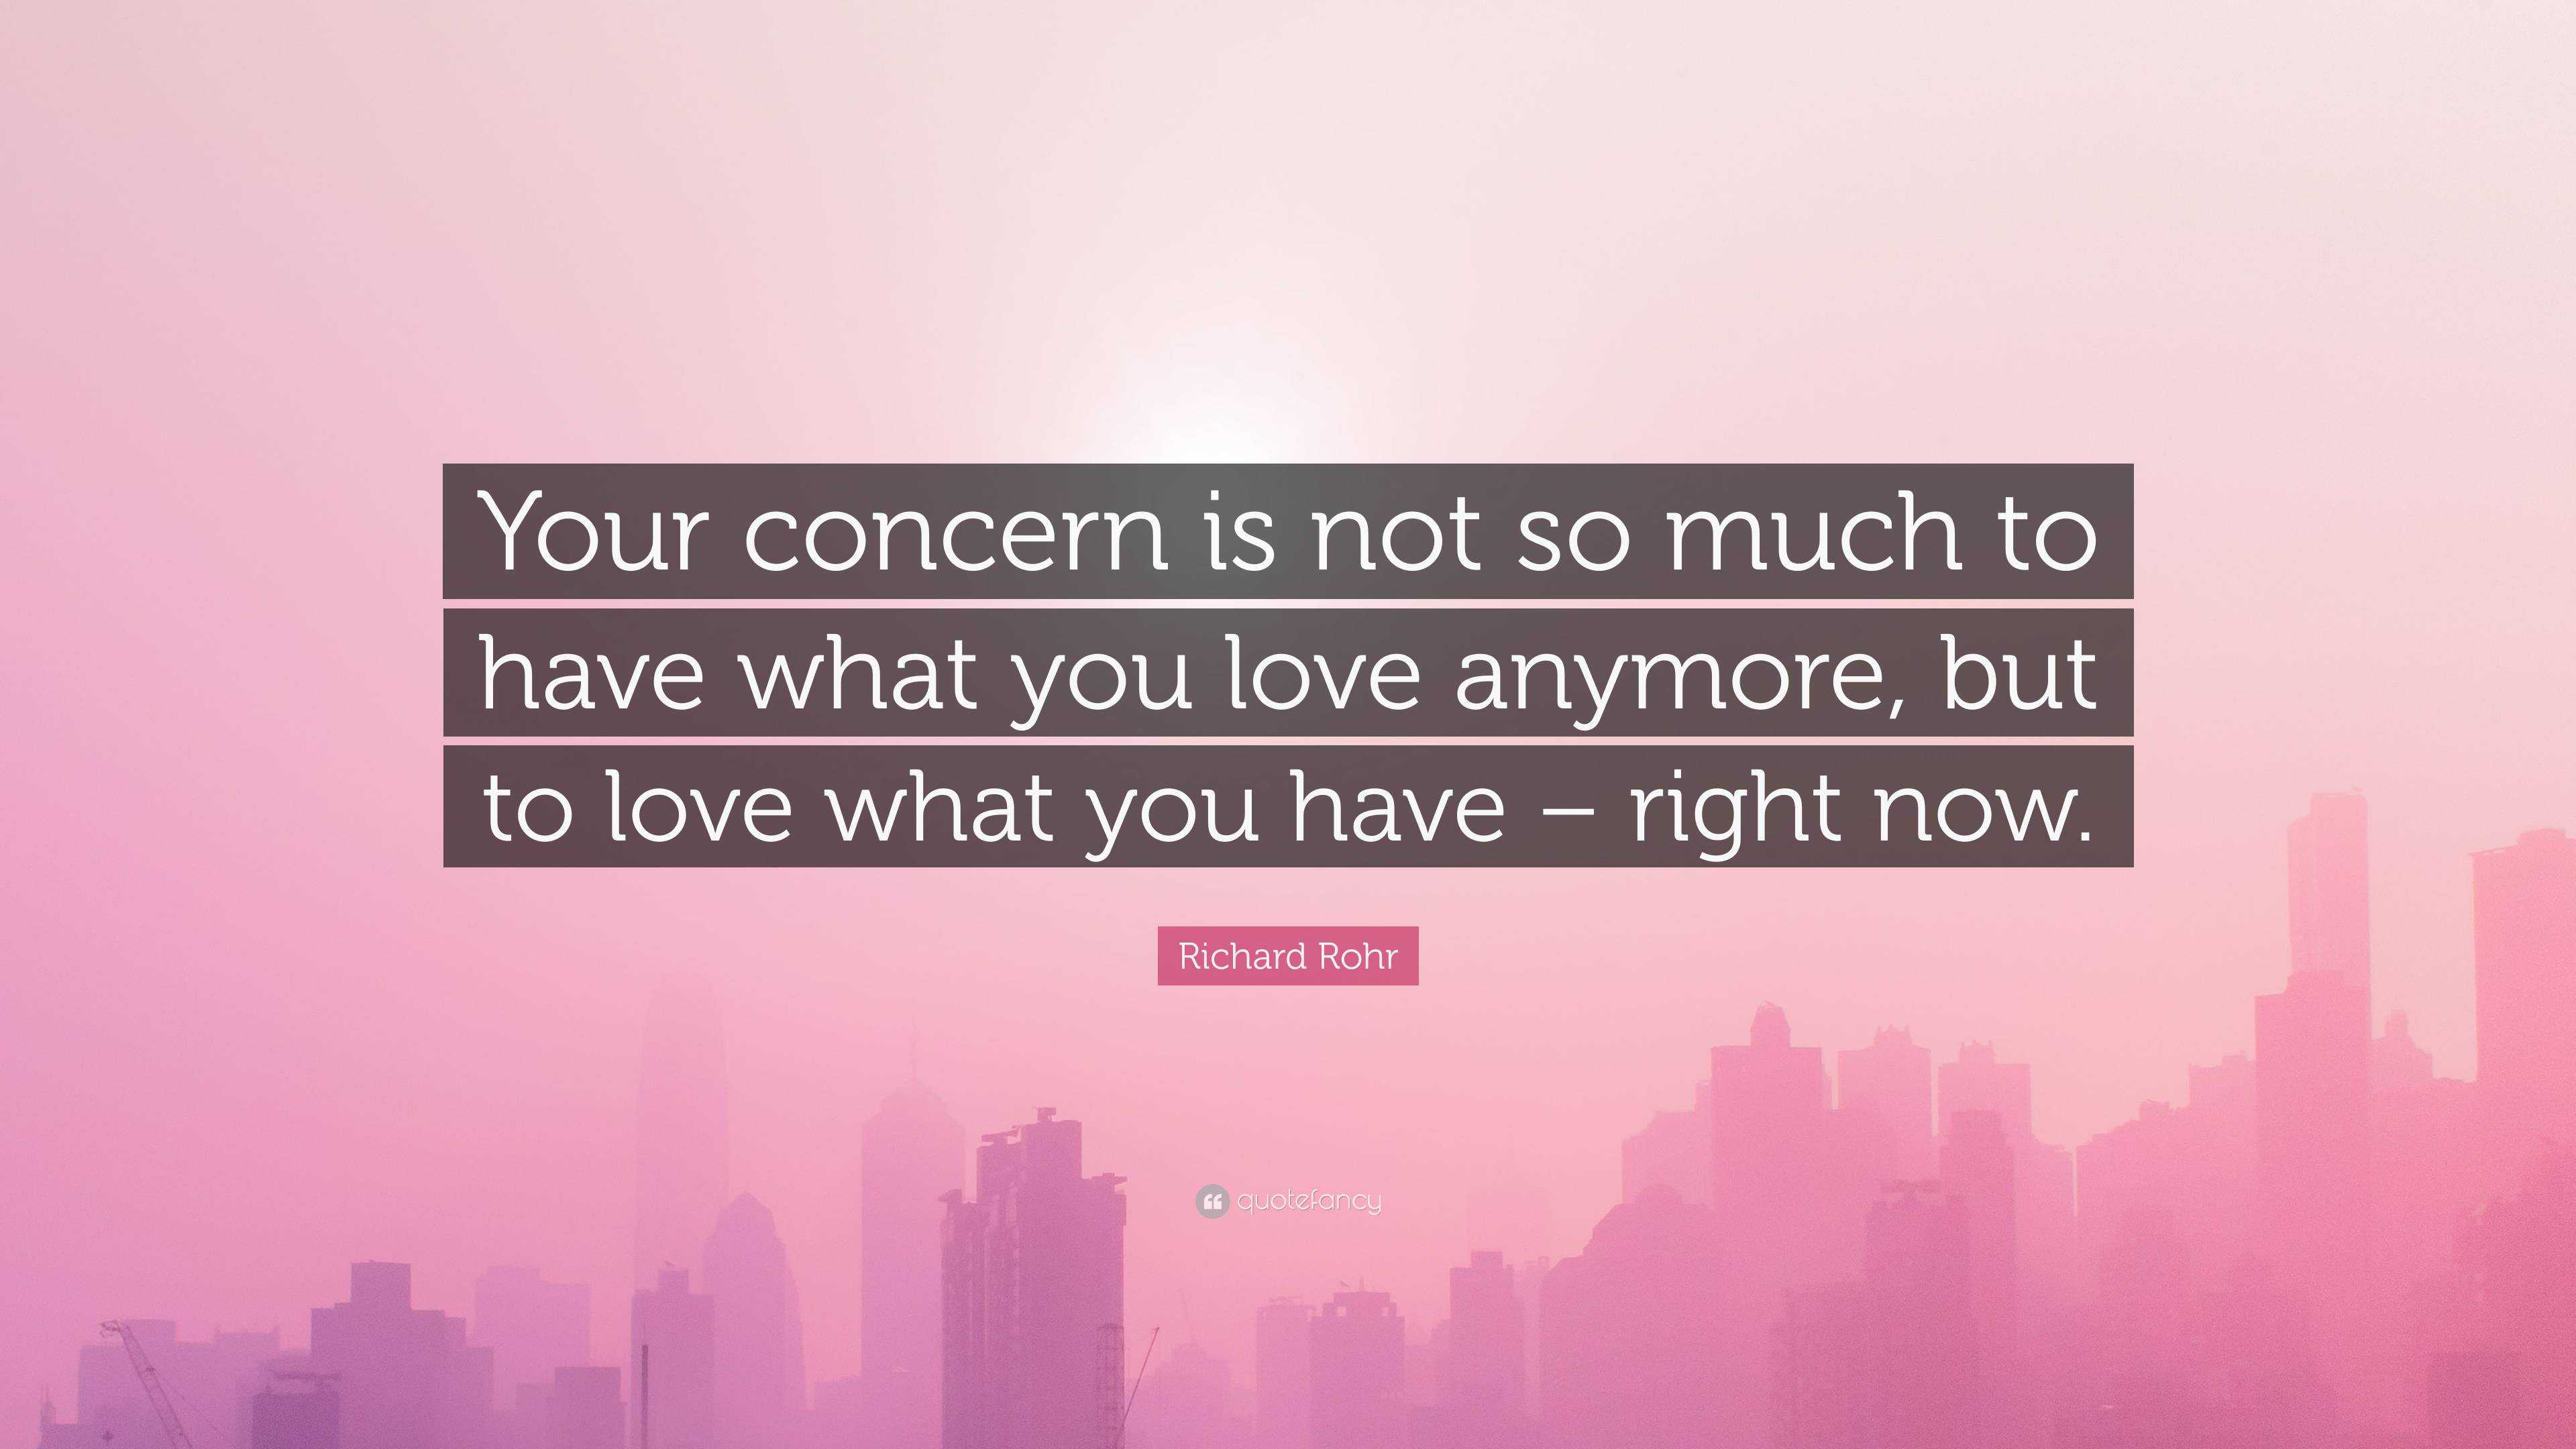 Richard Rohr Quote: “Your concern is not so much to have what you love ...